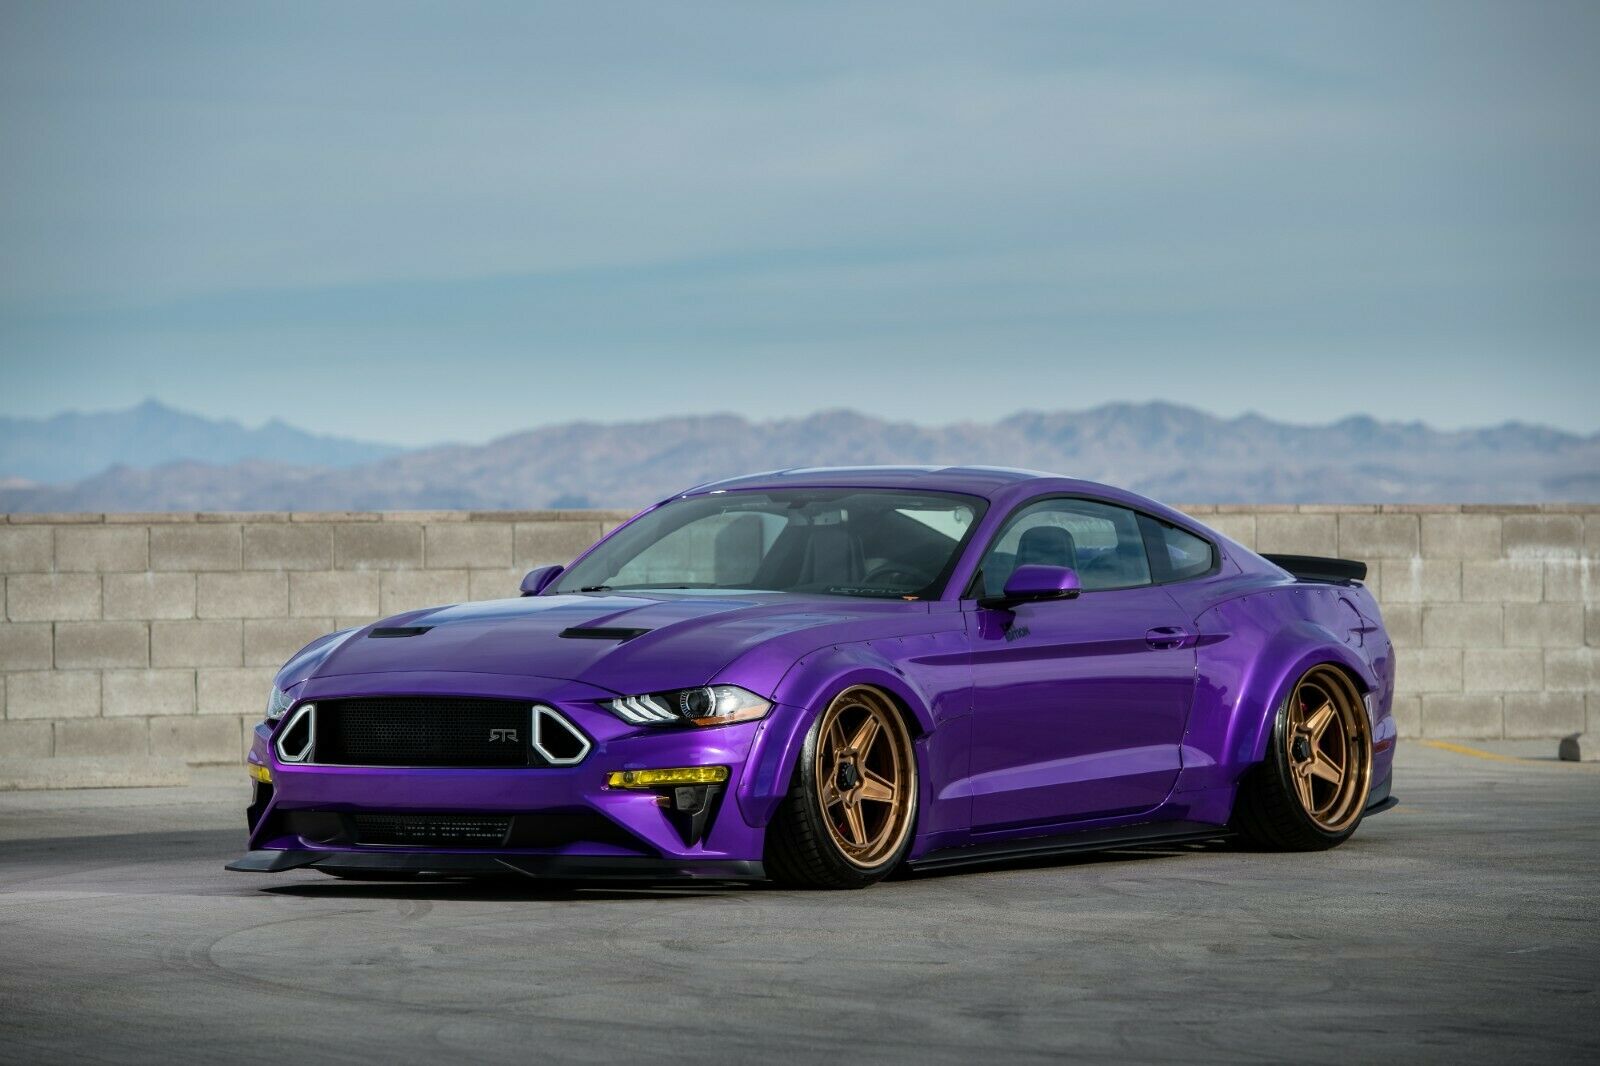 Mustang Of The Day: TJIN Edition 2019 Ford Mustang